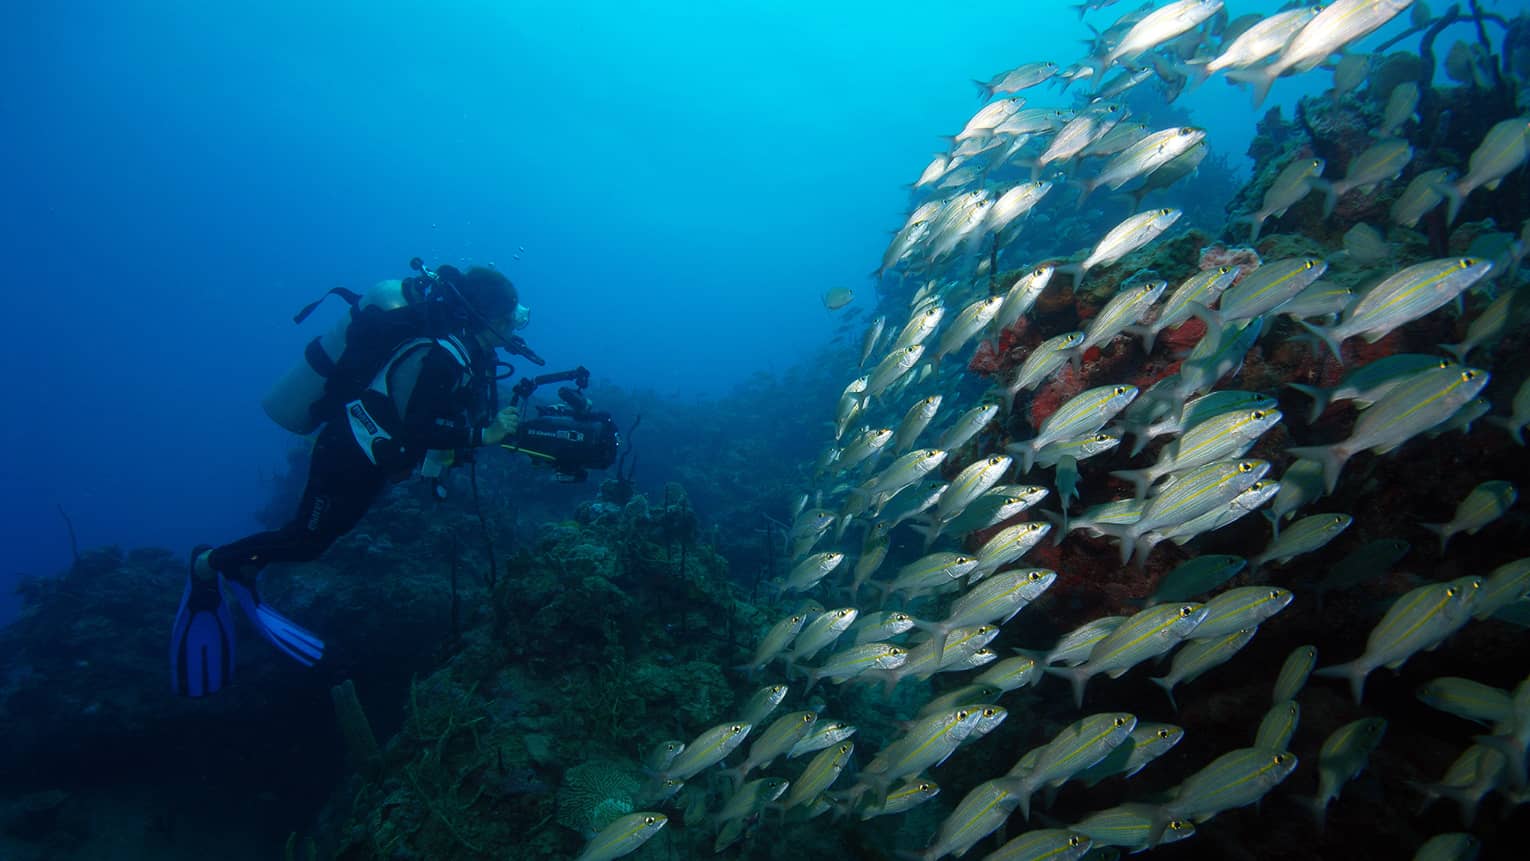 Scuba diver underwater by large school of tropical fish